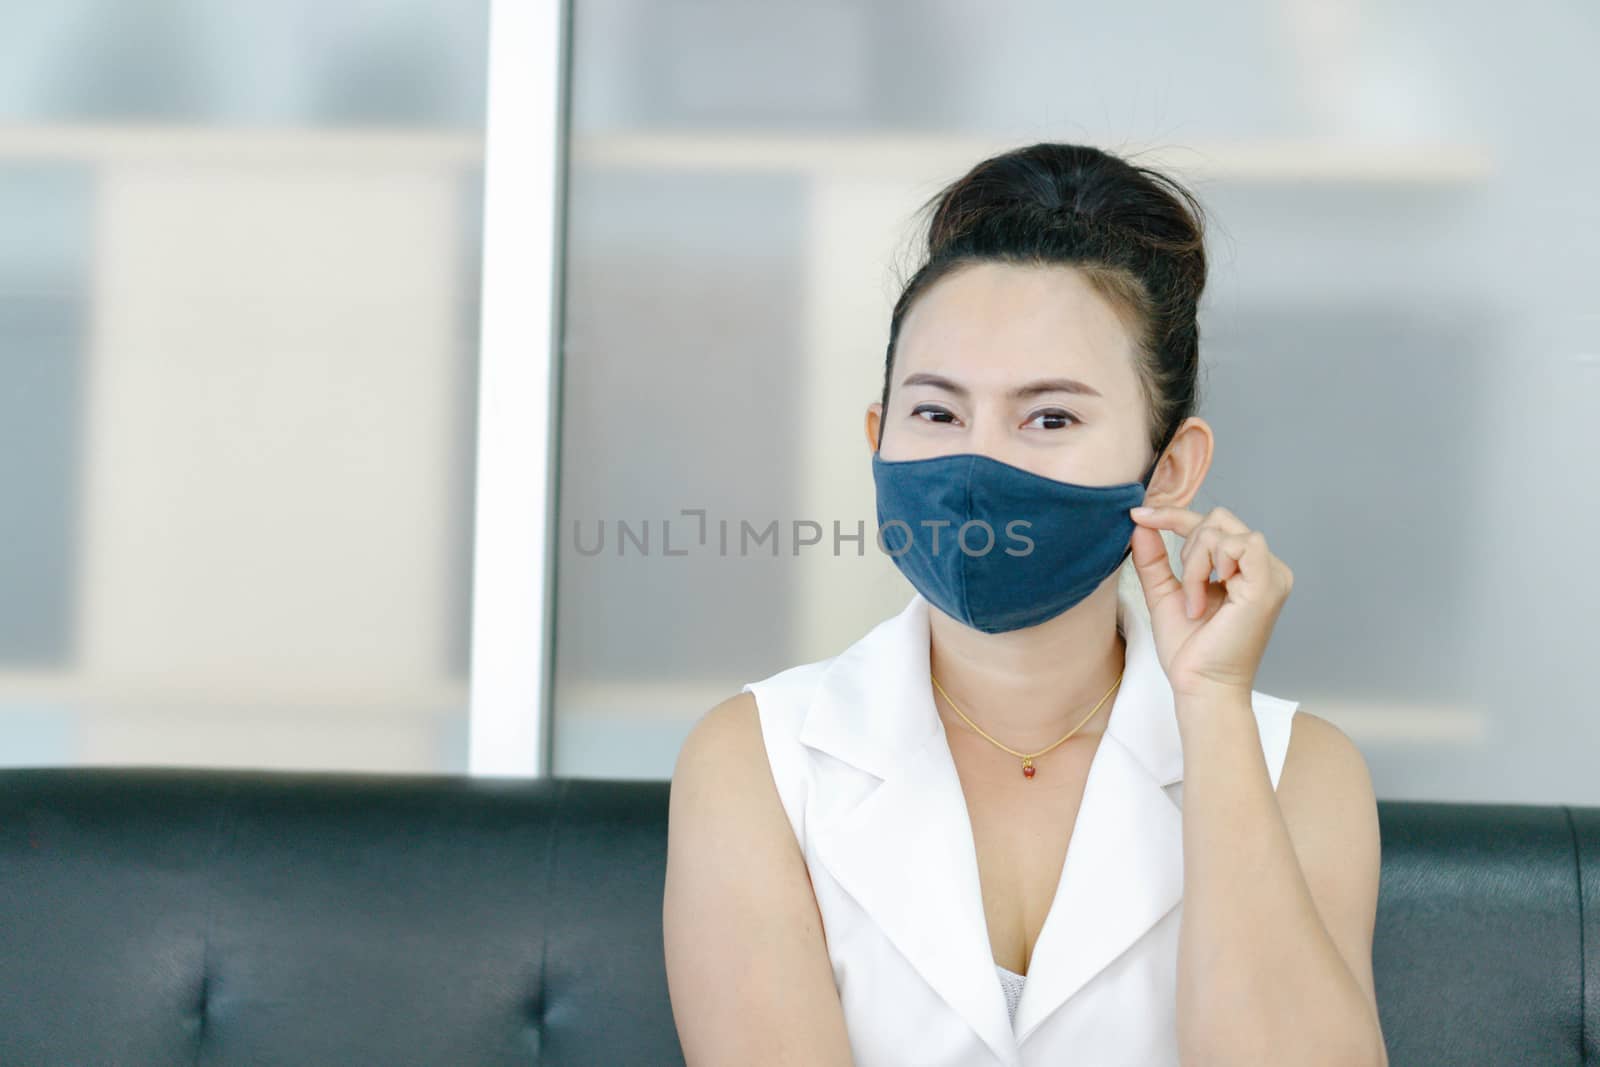 Closeup asian woman wearing face mask for protect air polution or virus covid 19, health care and medical concept